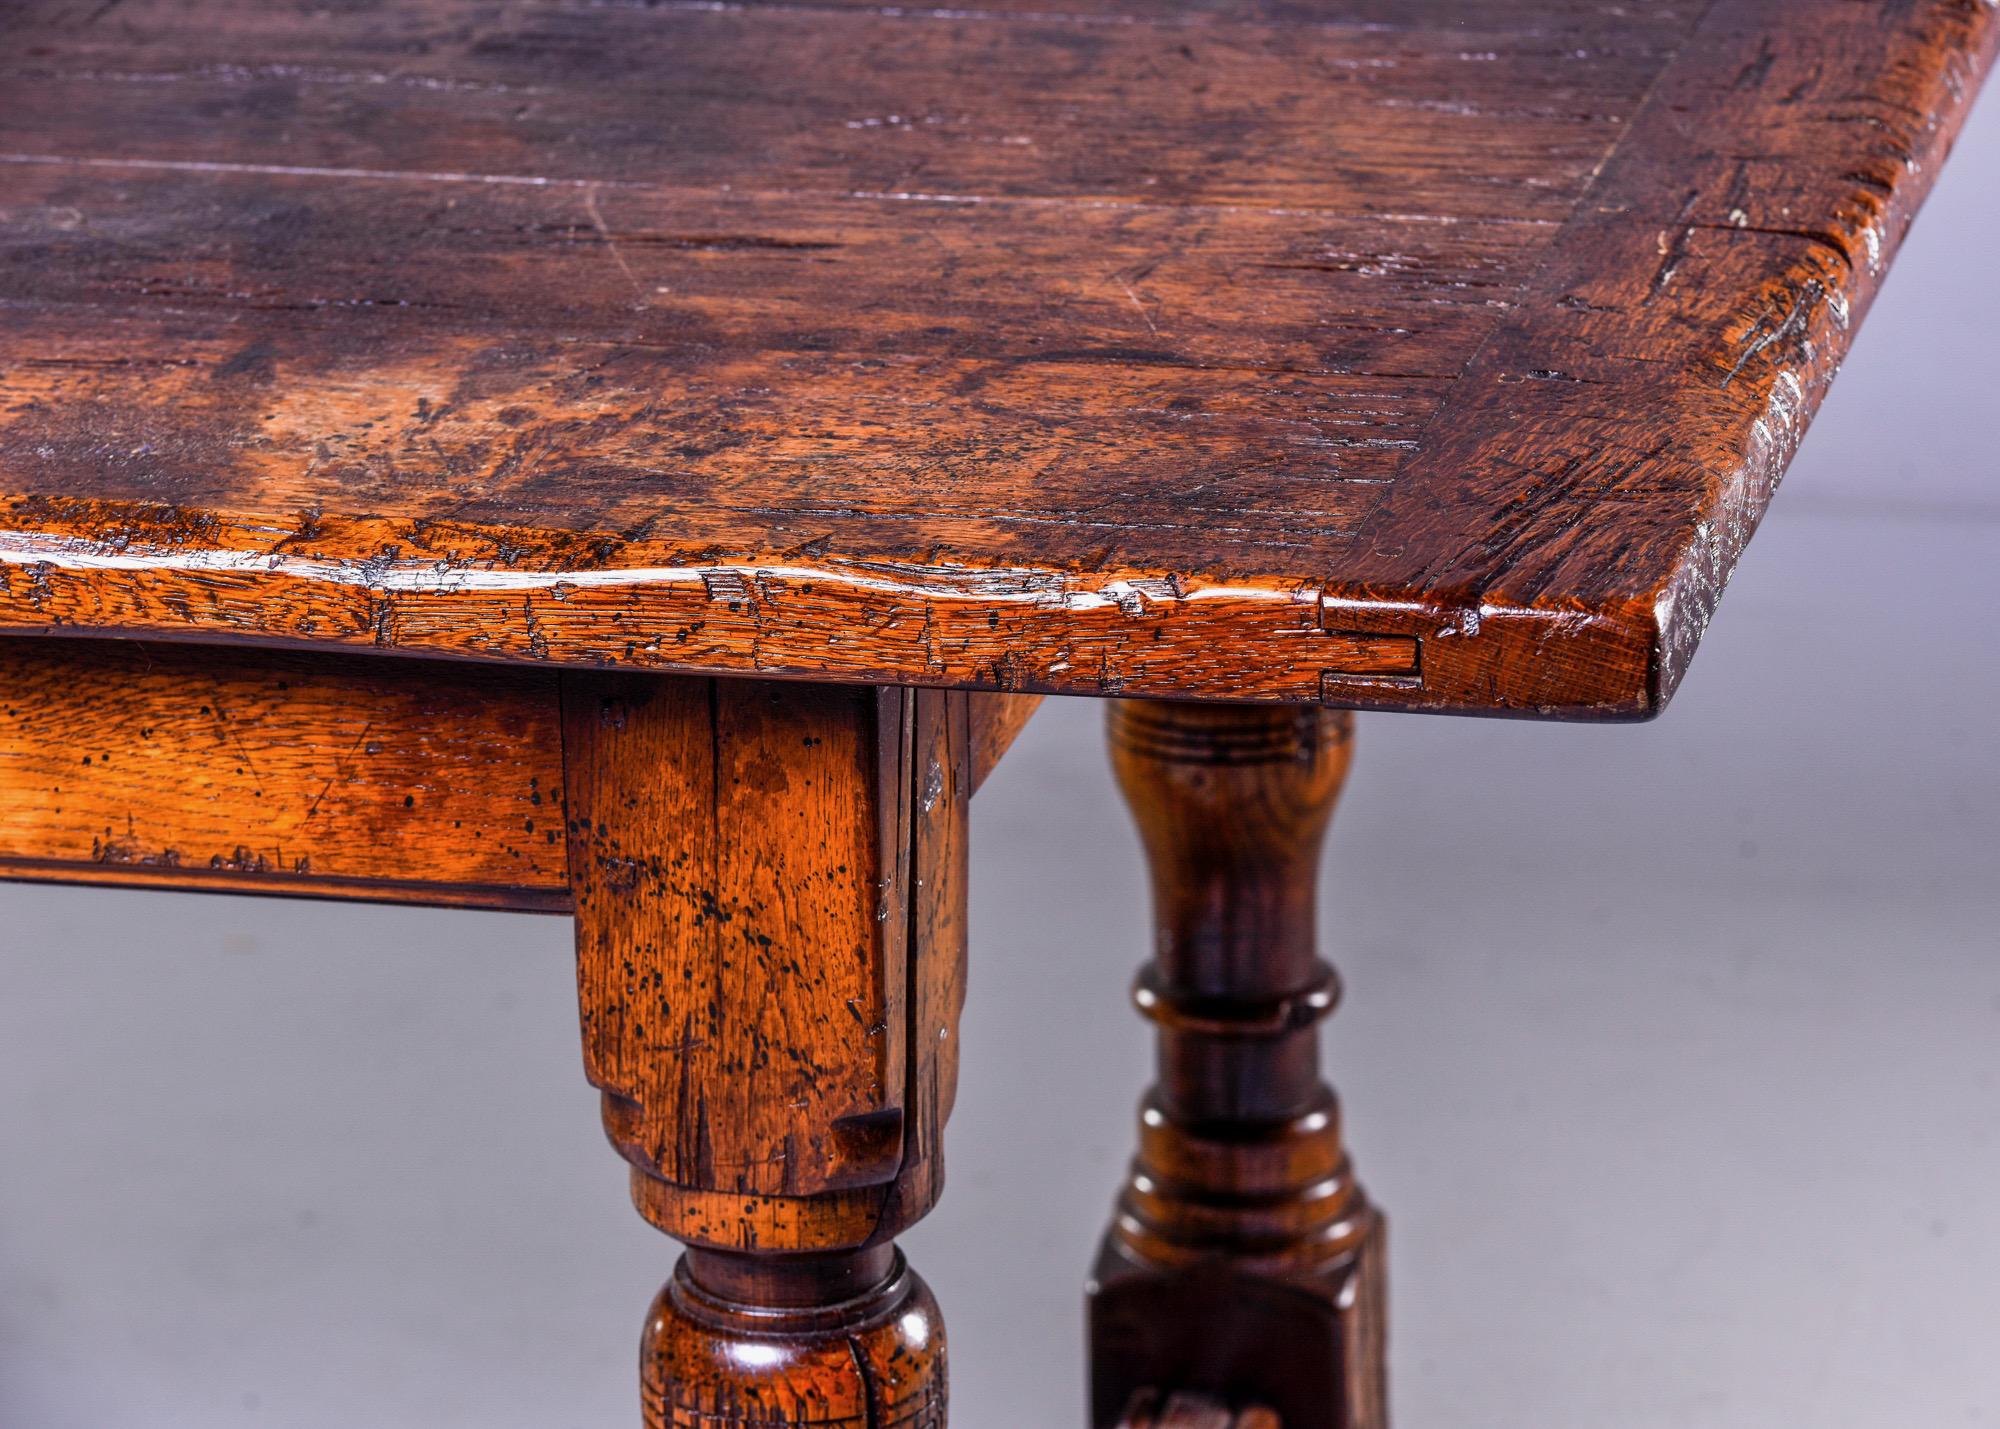 Found at high end estate, this circa 1990s top quality rustic dining table made in style of 19th century European farm table with heavy base, turned detail on legs and removable, distressed four plank top. Unknown maker.